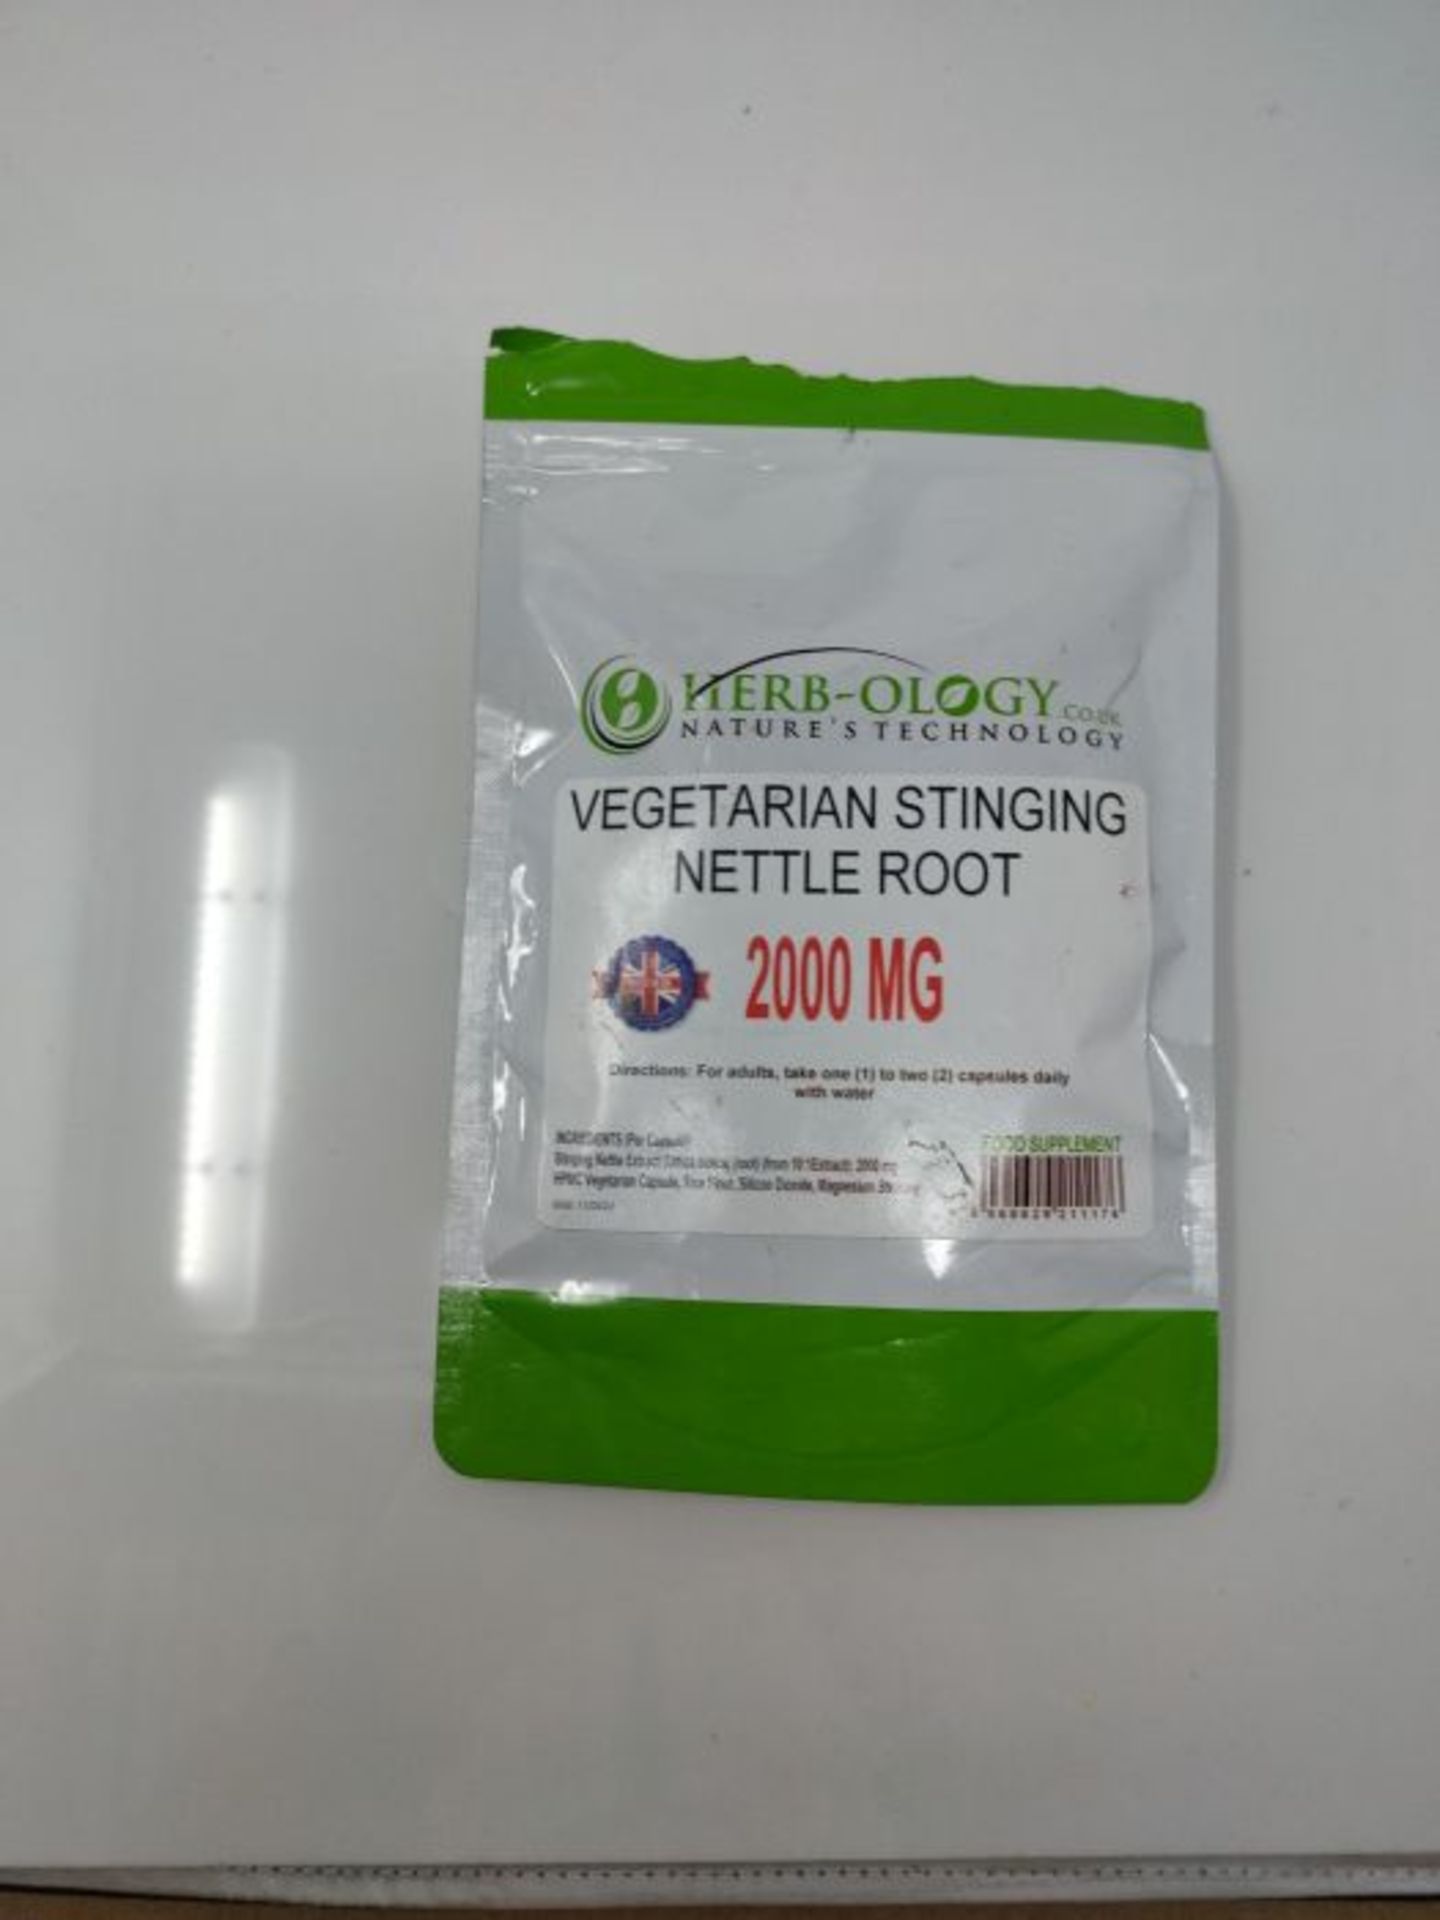 Herb-Ology Stinging Nettle Root Capsules | 120 Nettle Root Capsules (10:1 Extract) 200 - Image 2 of 2